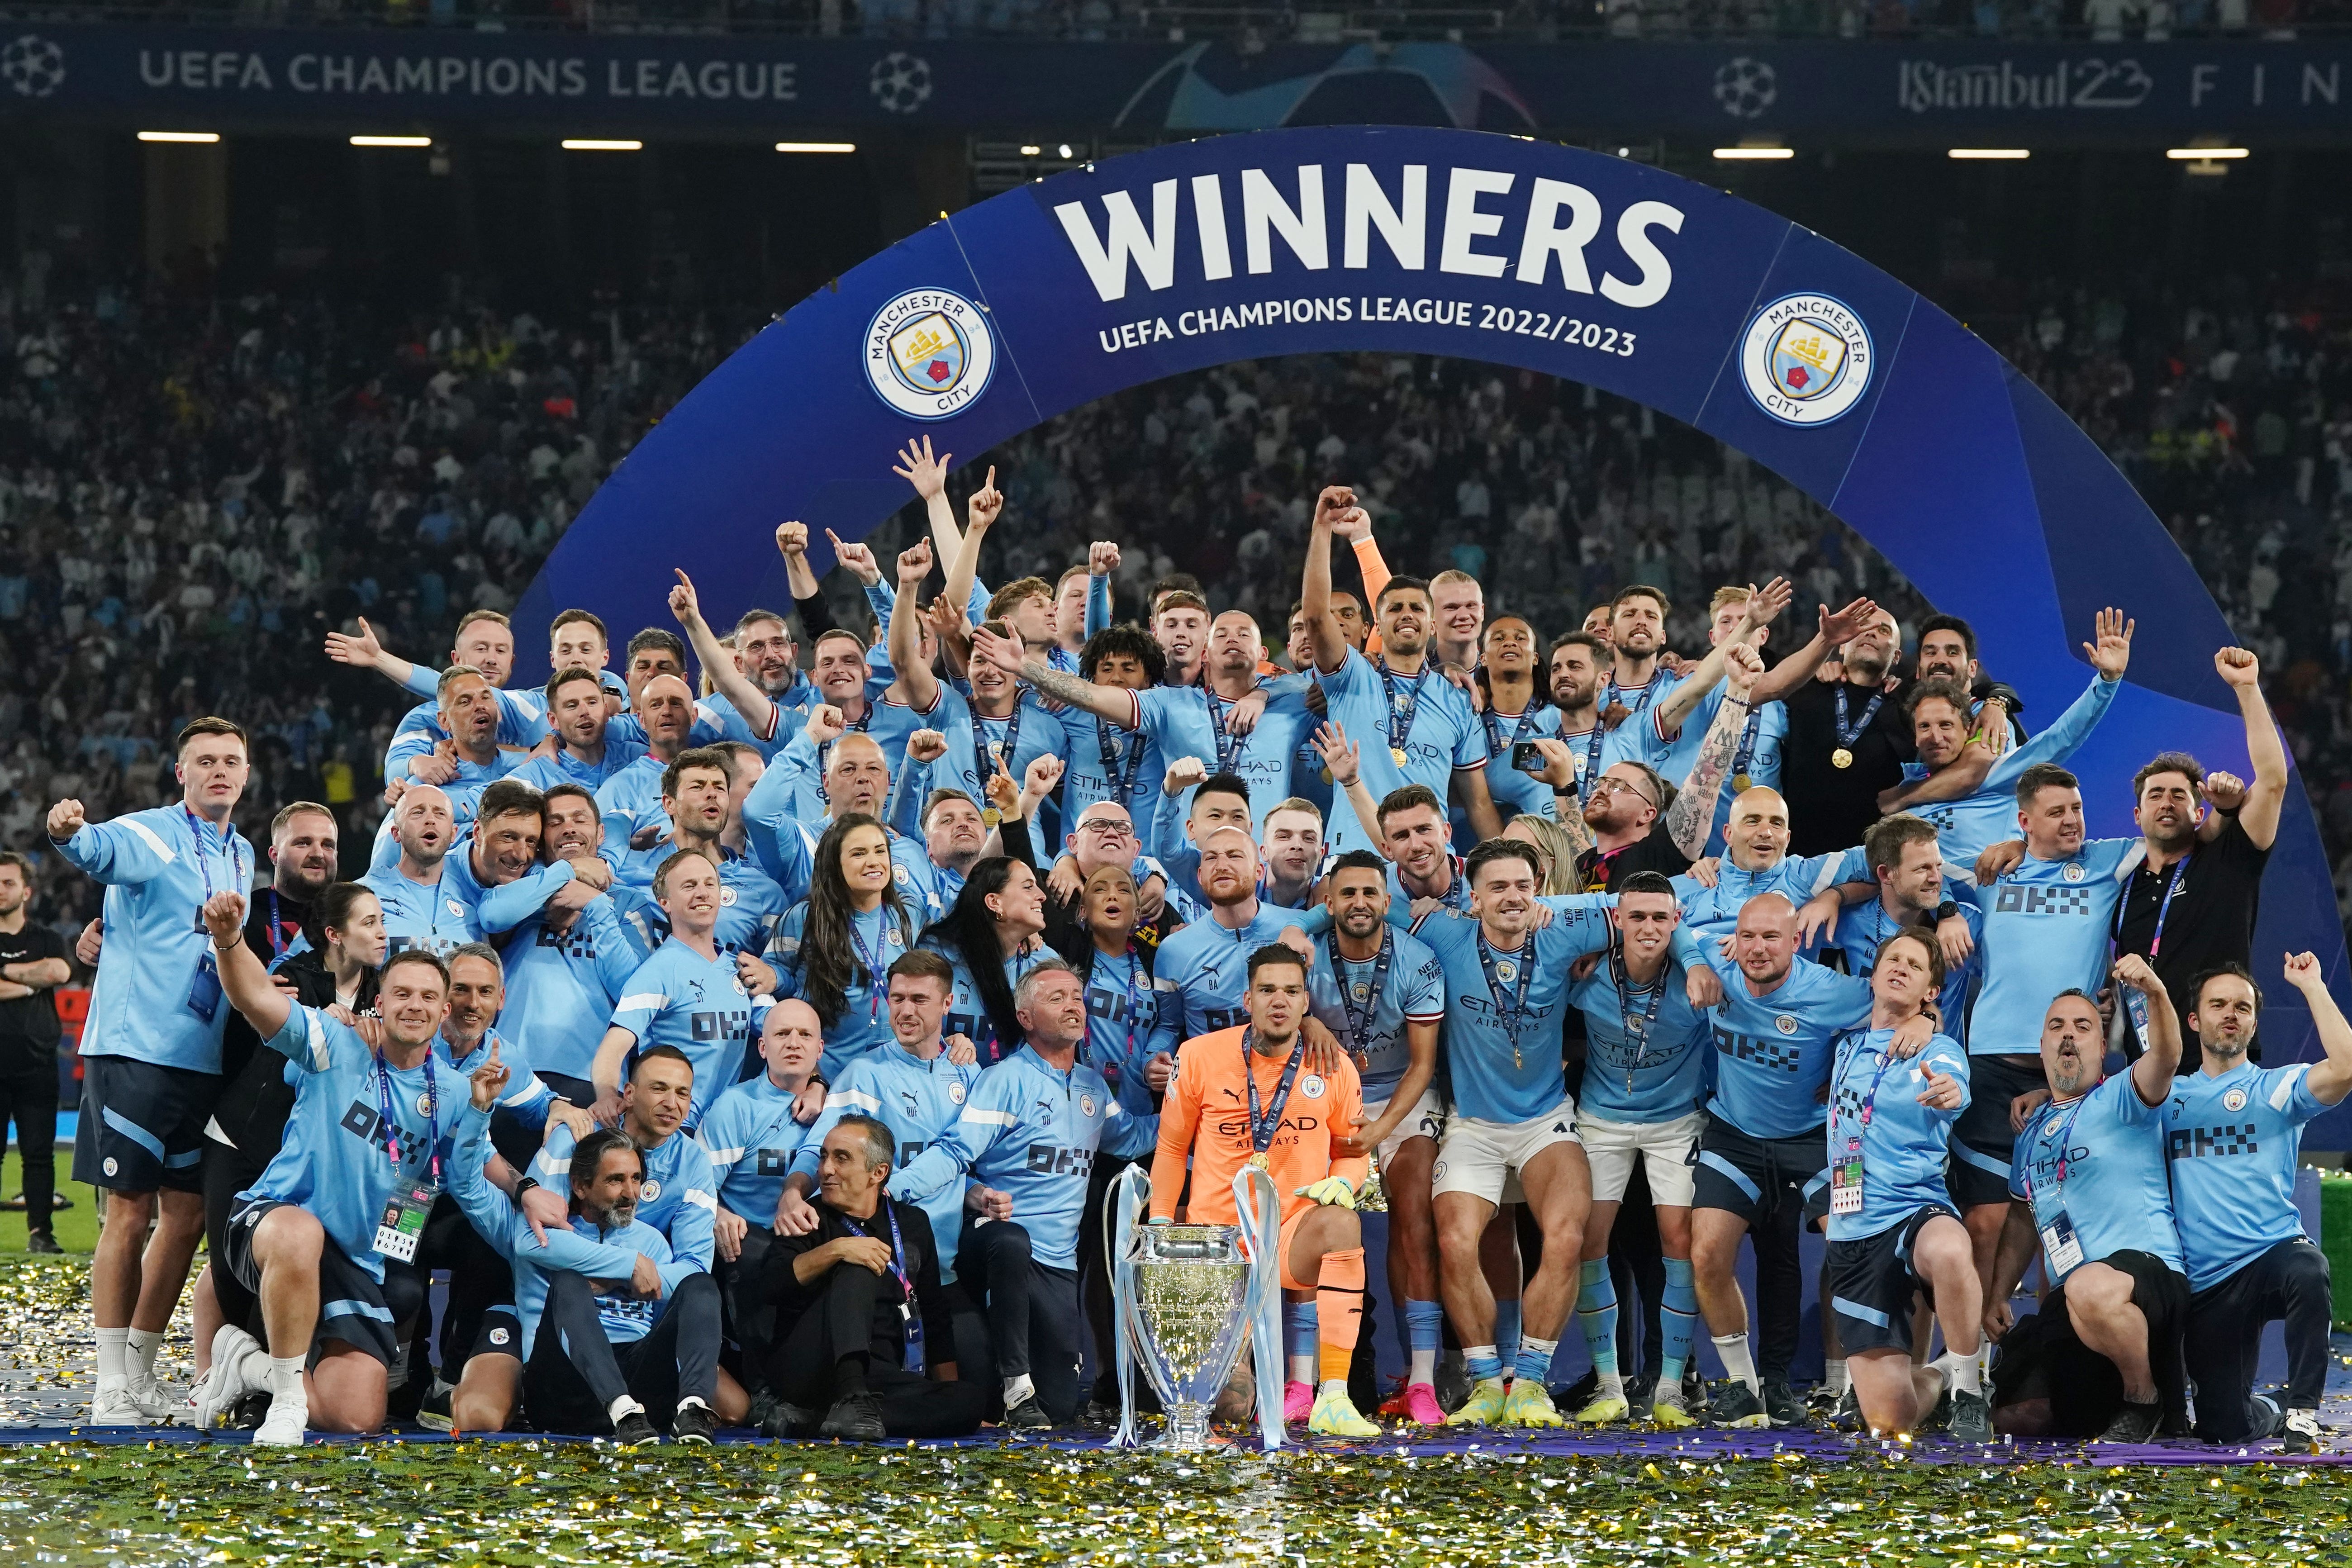 Why are Premier League clubs failing in the Champions League? – Soccer  Politics / The Politics of Football